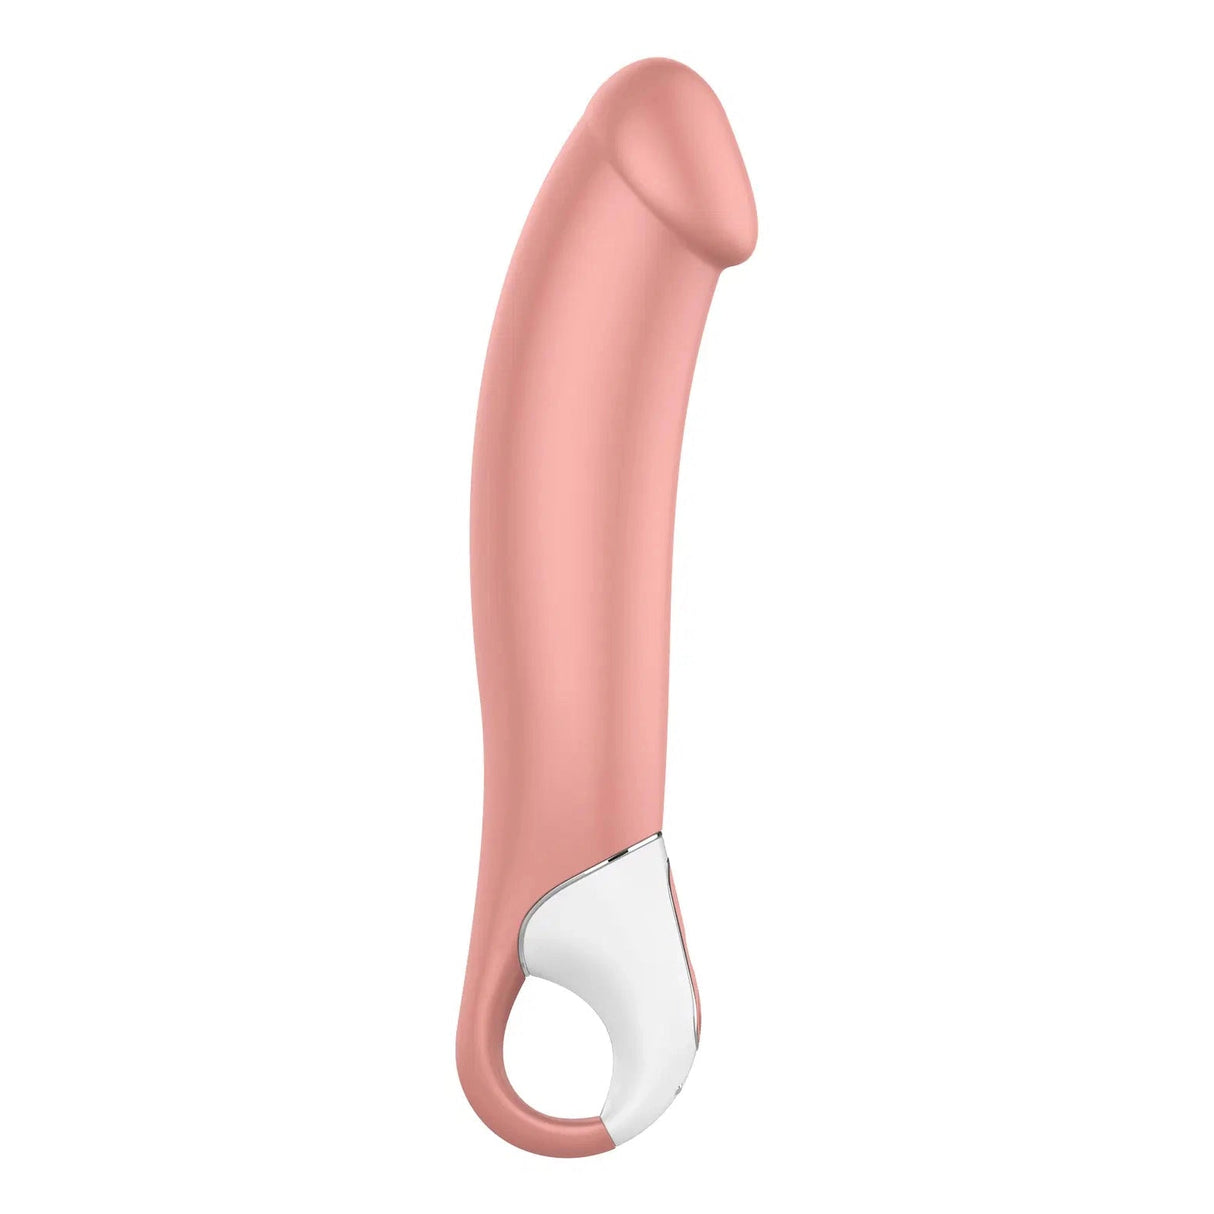 Satisfyer Vibes Rechargeable Master